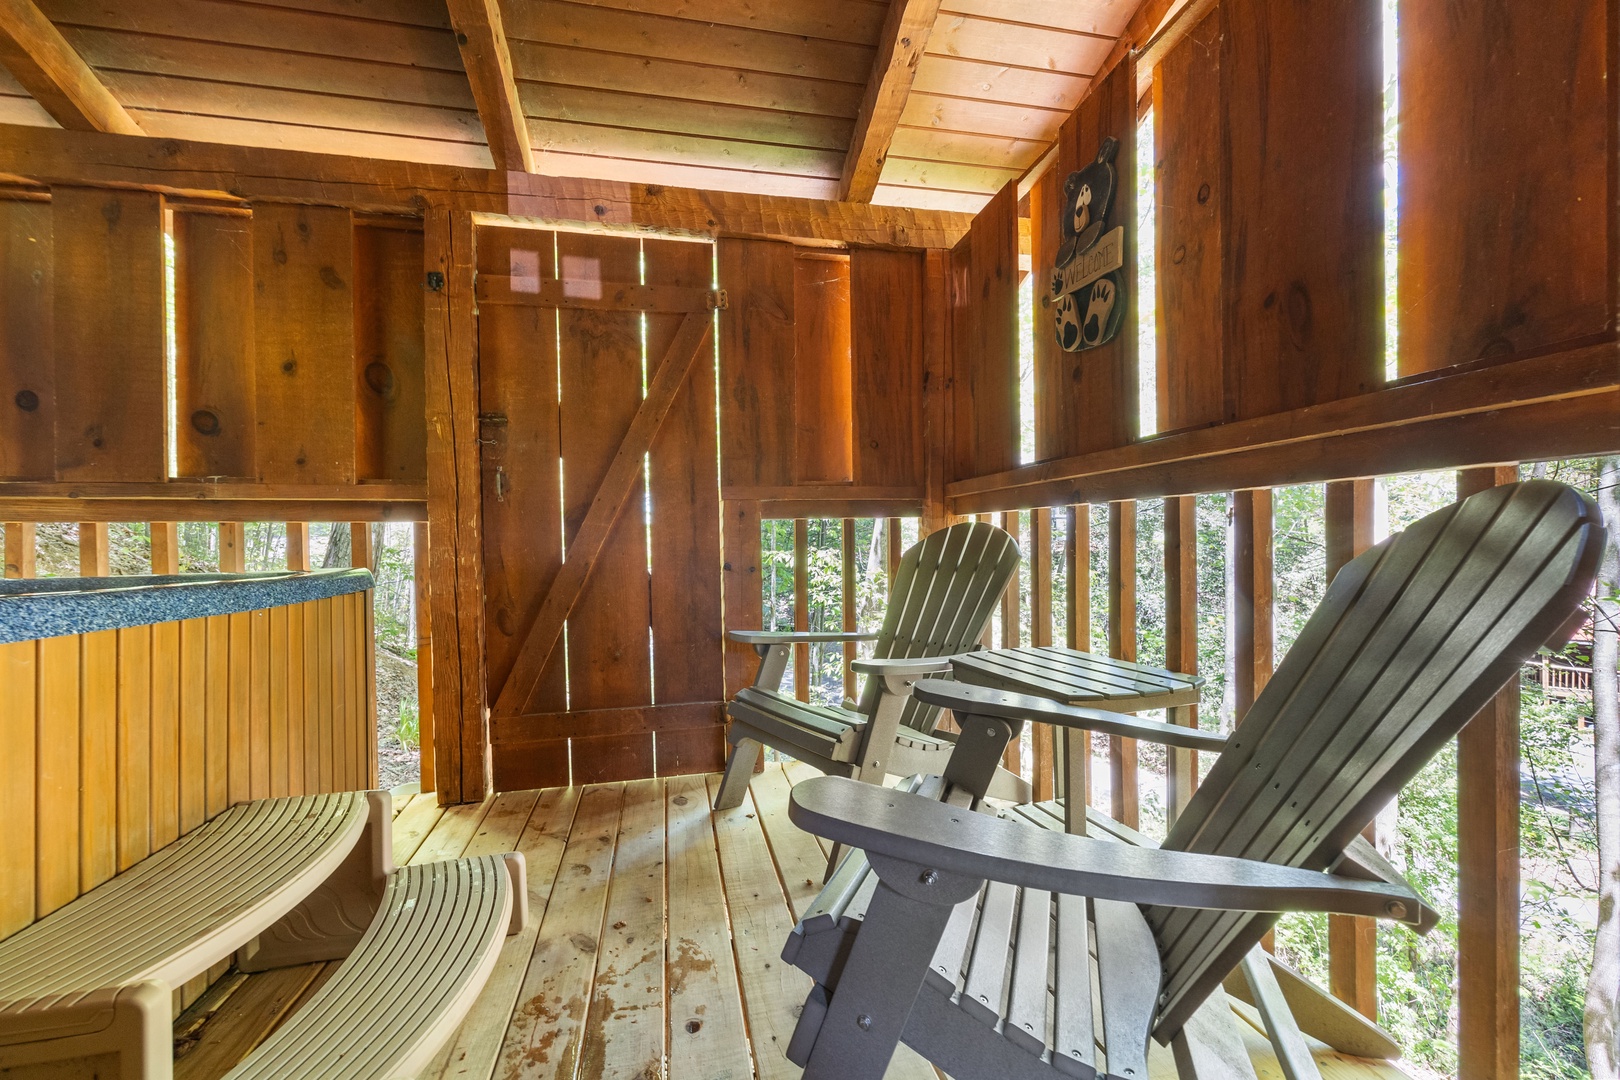 Seating on a covered deck with privacy fence at Bearfoot Crossing, a 1-bedroom cabin rental located in Pigeon Forge